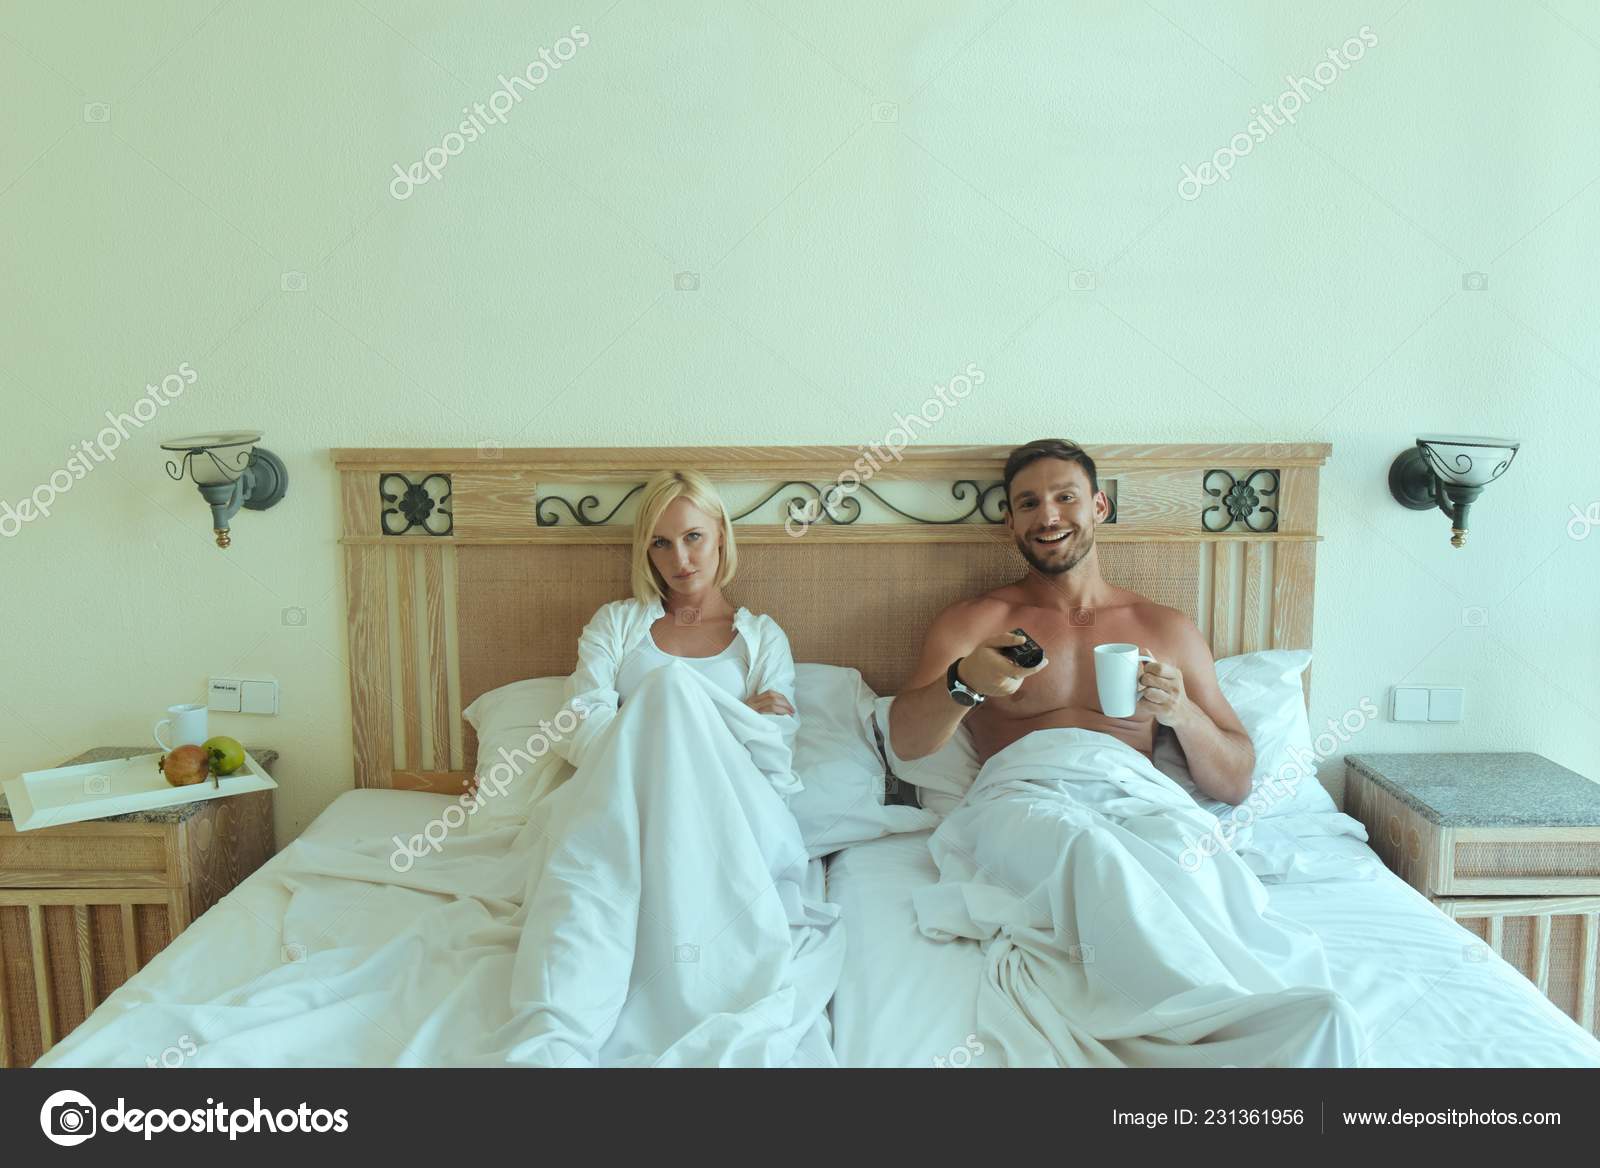 Handsome Man Beautiful Blonde Lying Bed Together Having Lack Communication Stock Photo by ©SuperStock2018 231361956